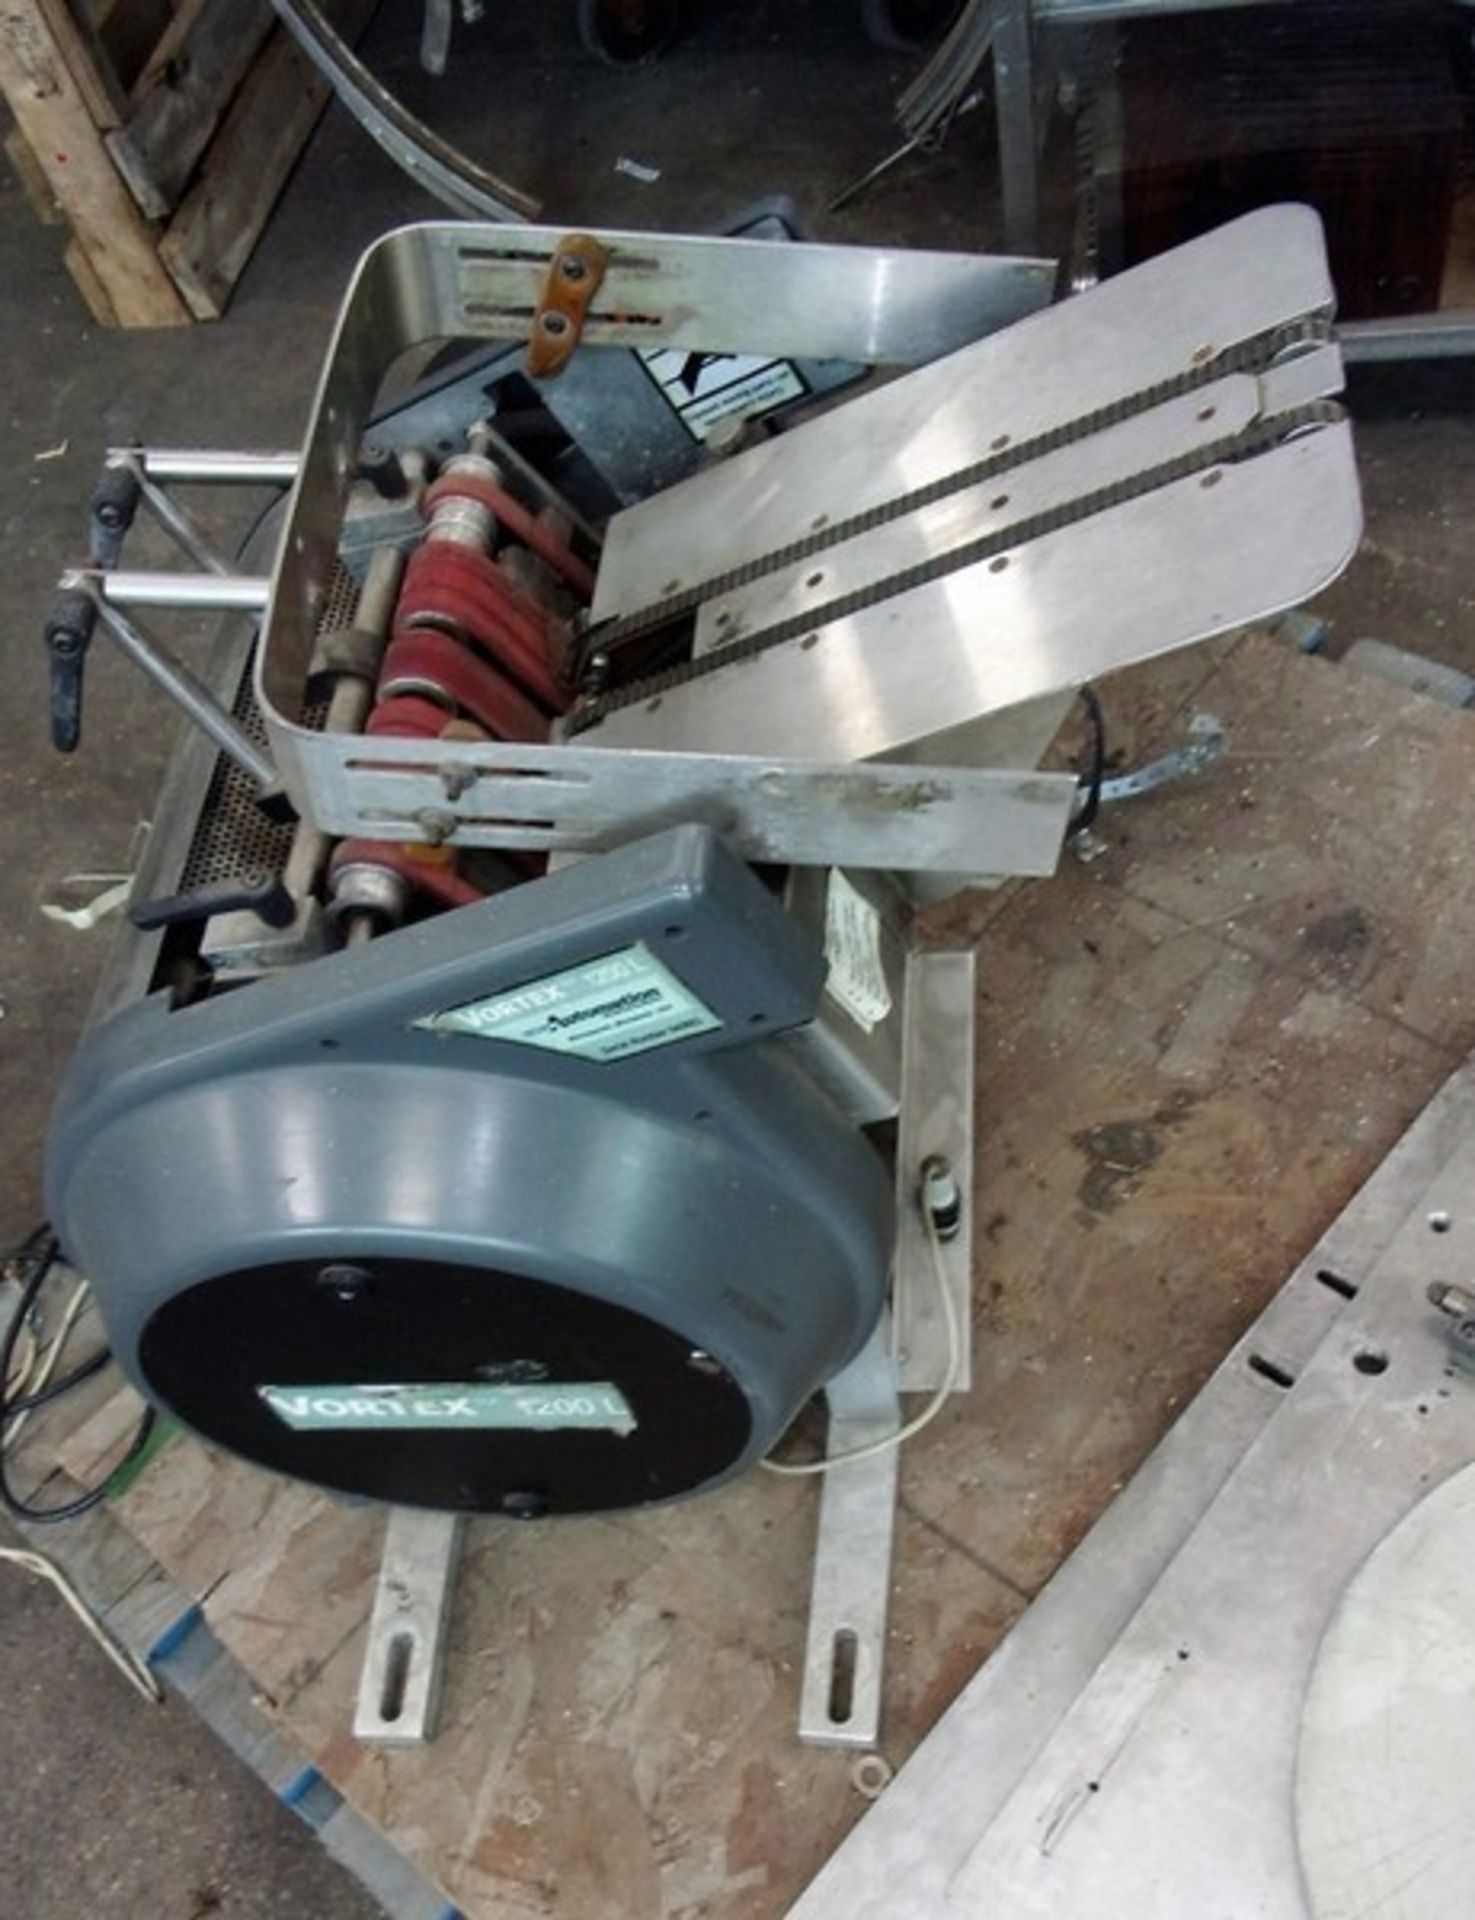 Vortex Inline Automation Auto Adjusting Friction Feeder, Model 1200L, S/N 040803, Unit was last used - Image 3 of 8